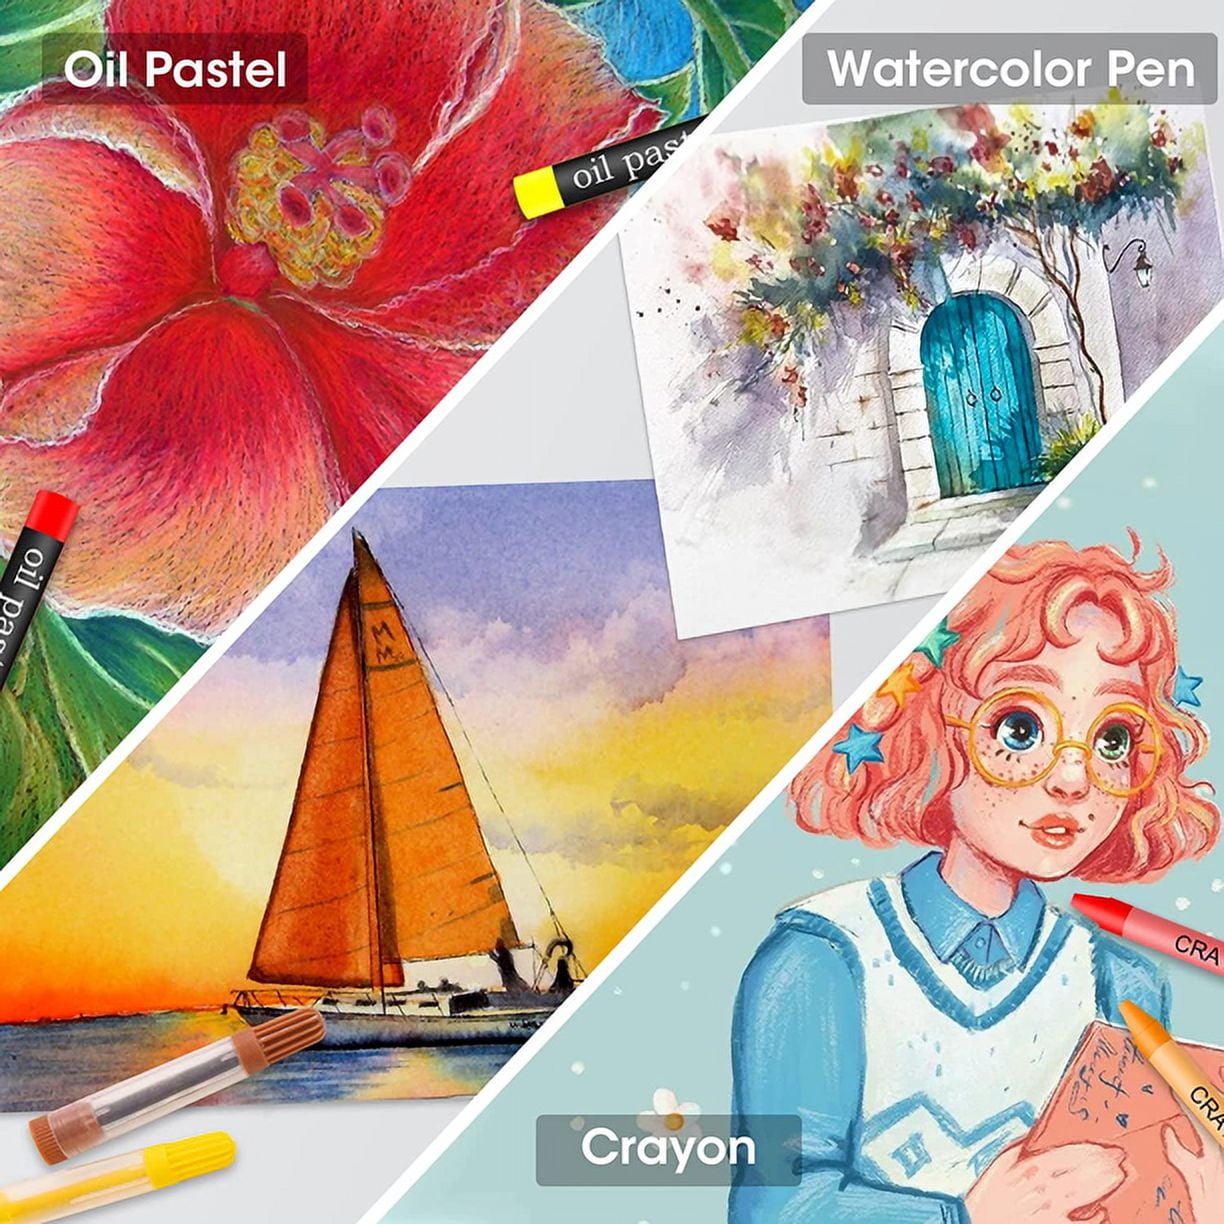  homicozy Art Supplies for Kids Ages 4-12,Mermaid Drawing Sets  Art Case,Coloring Kits with Double Sided Trifold Easel,Crayon,Colored  Pencil,Marker,Coloring Book,Drawing Stuffs Gifts for Girls Age 4-6-8